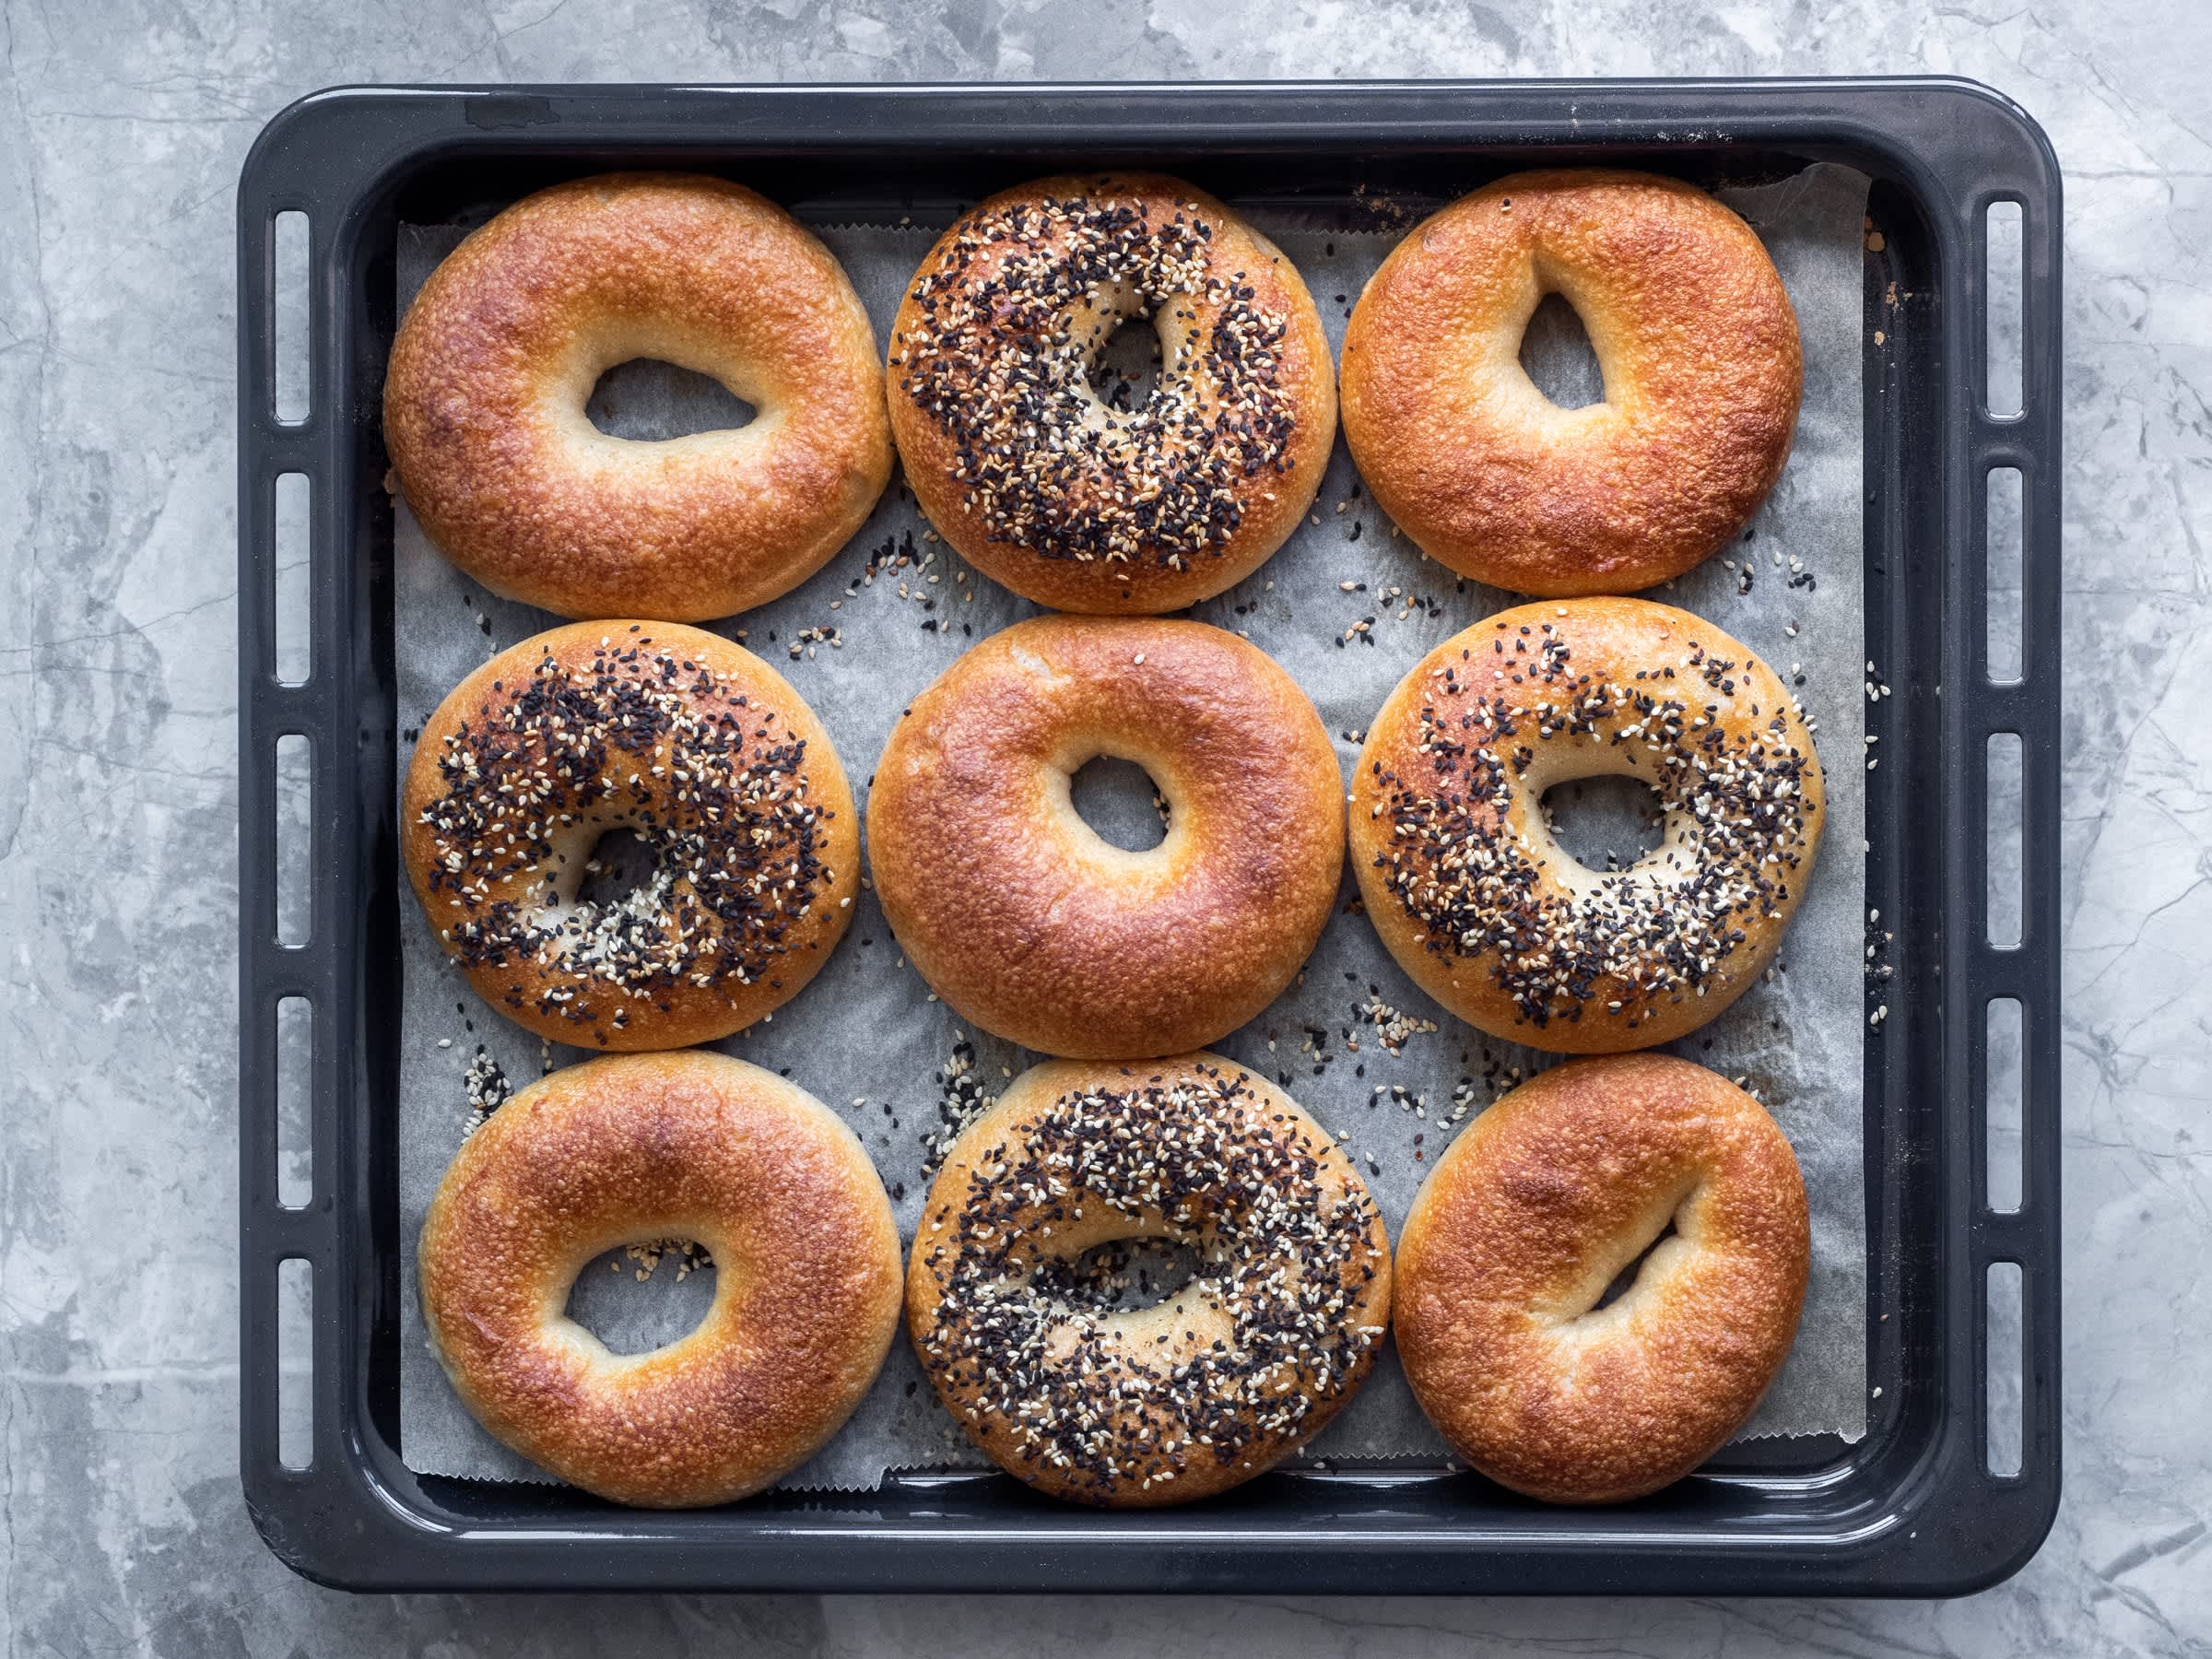 Sourdough store-bought bagels on oven tray